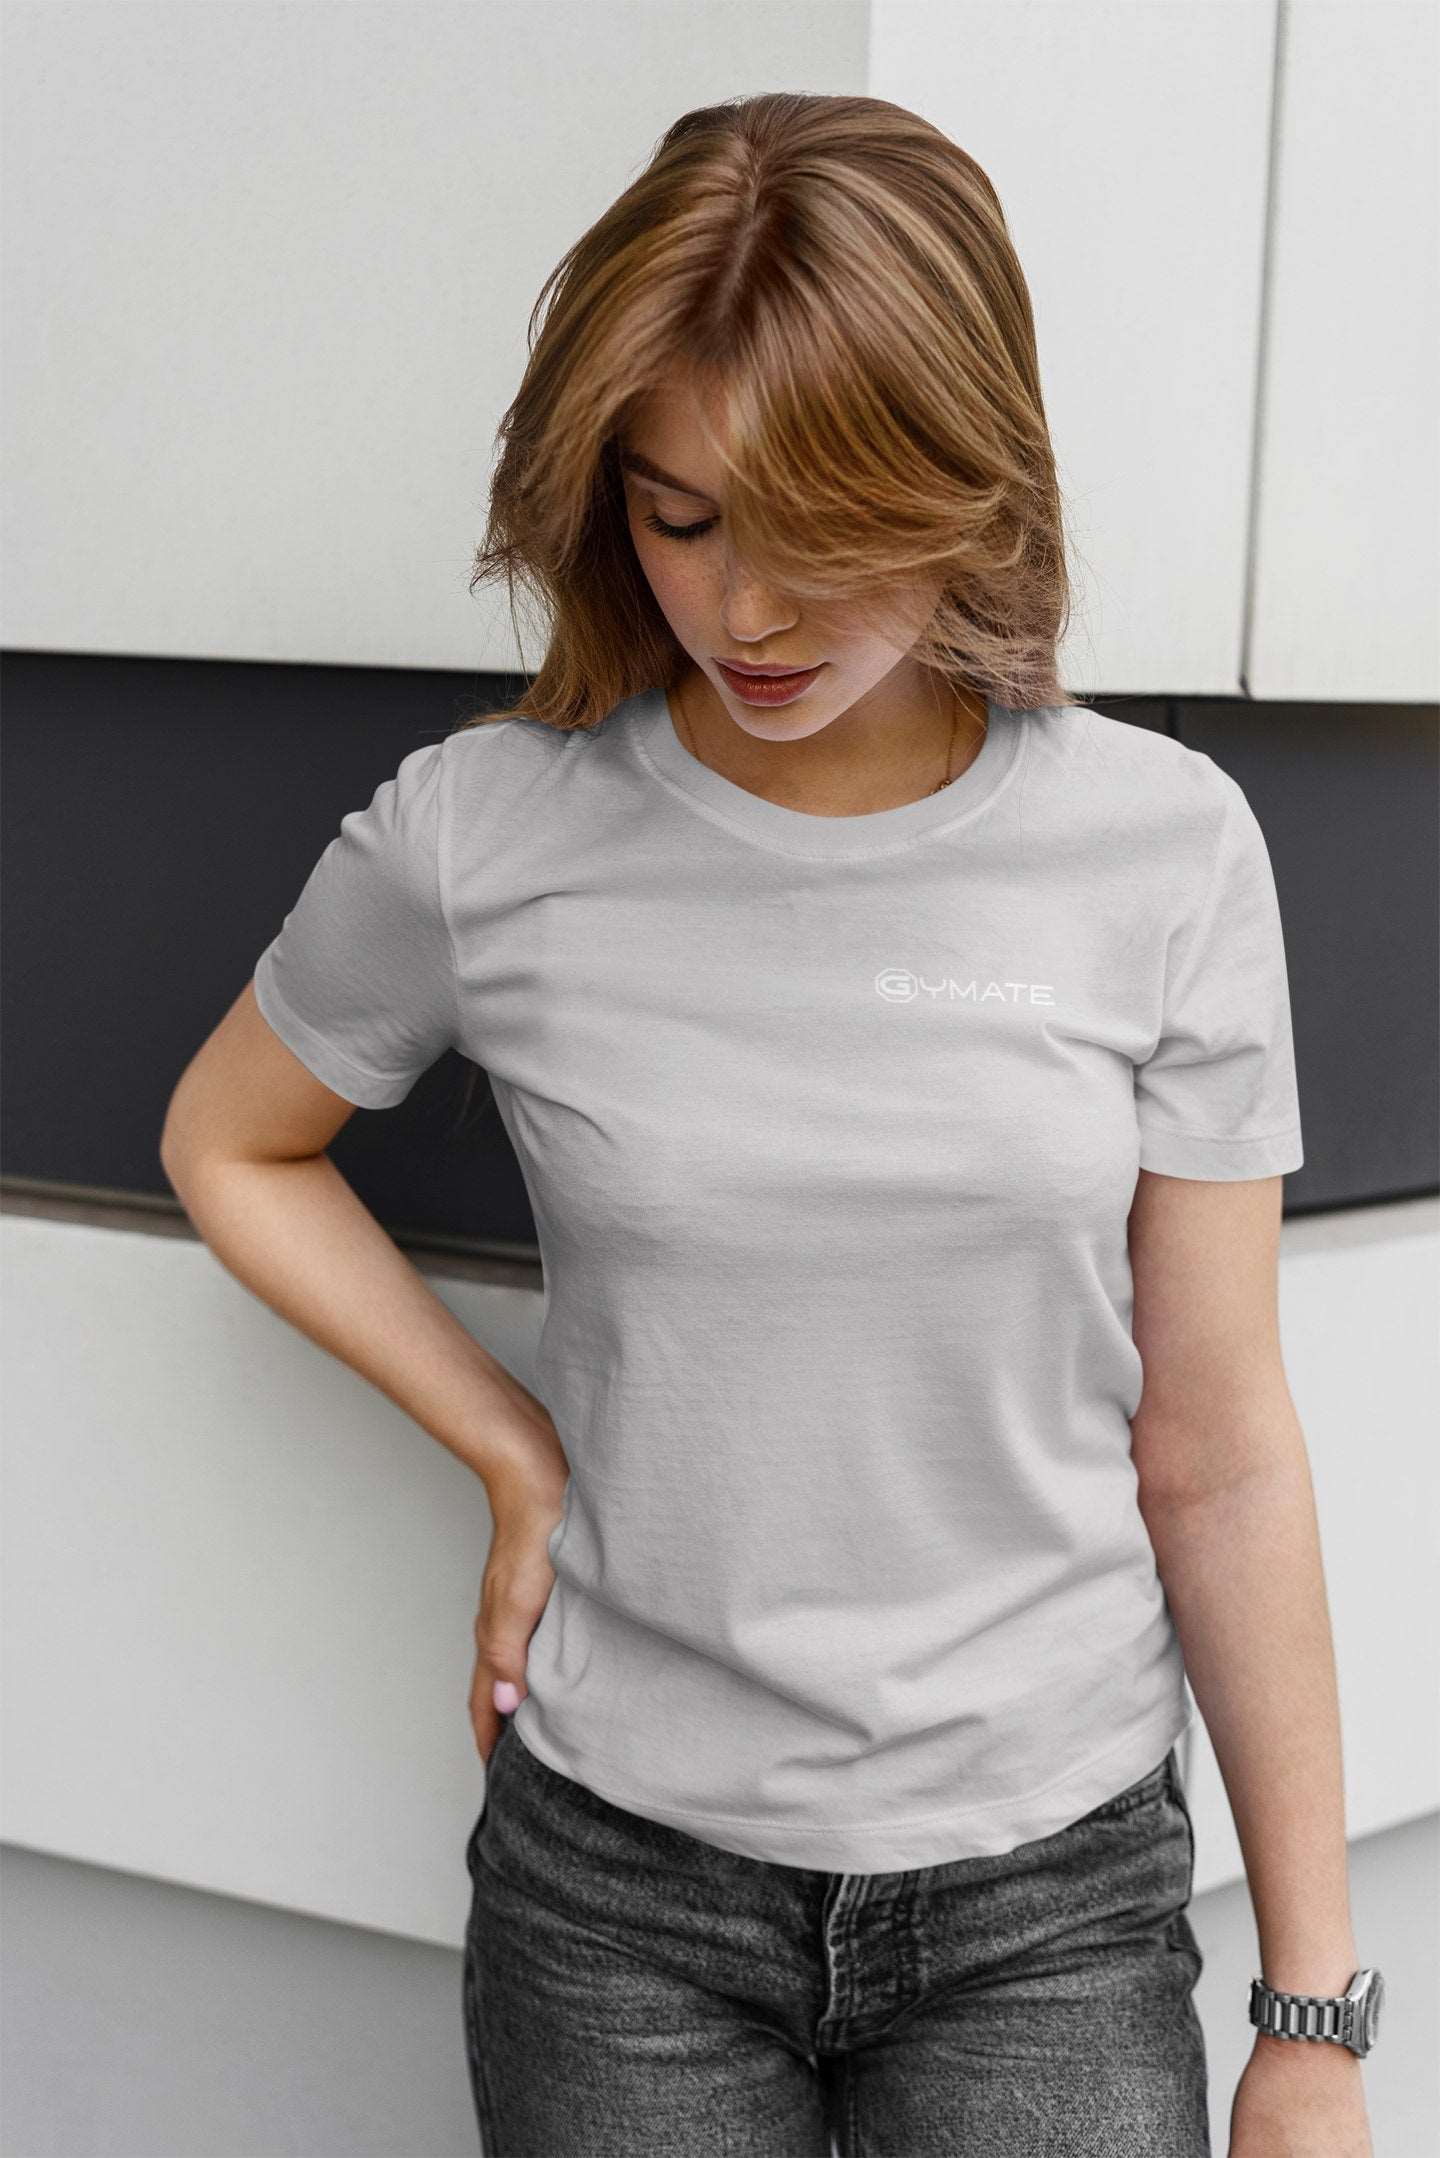 Designer T shirts for women Gymate [chest] grey